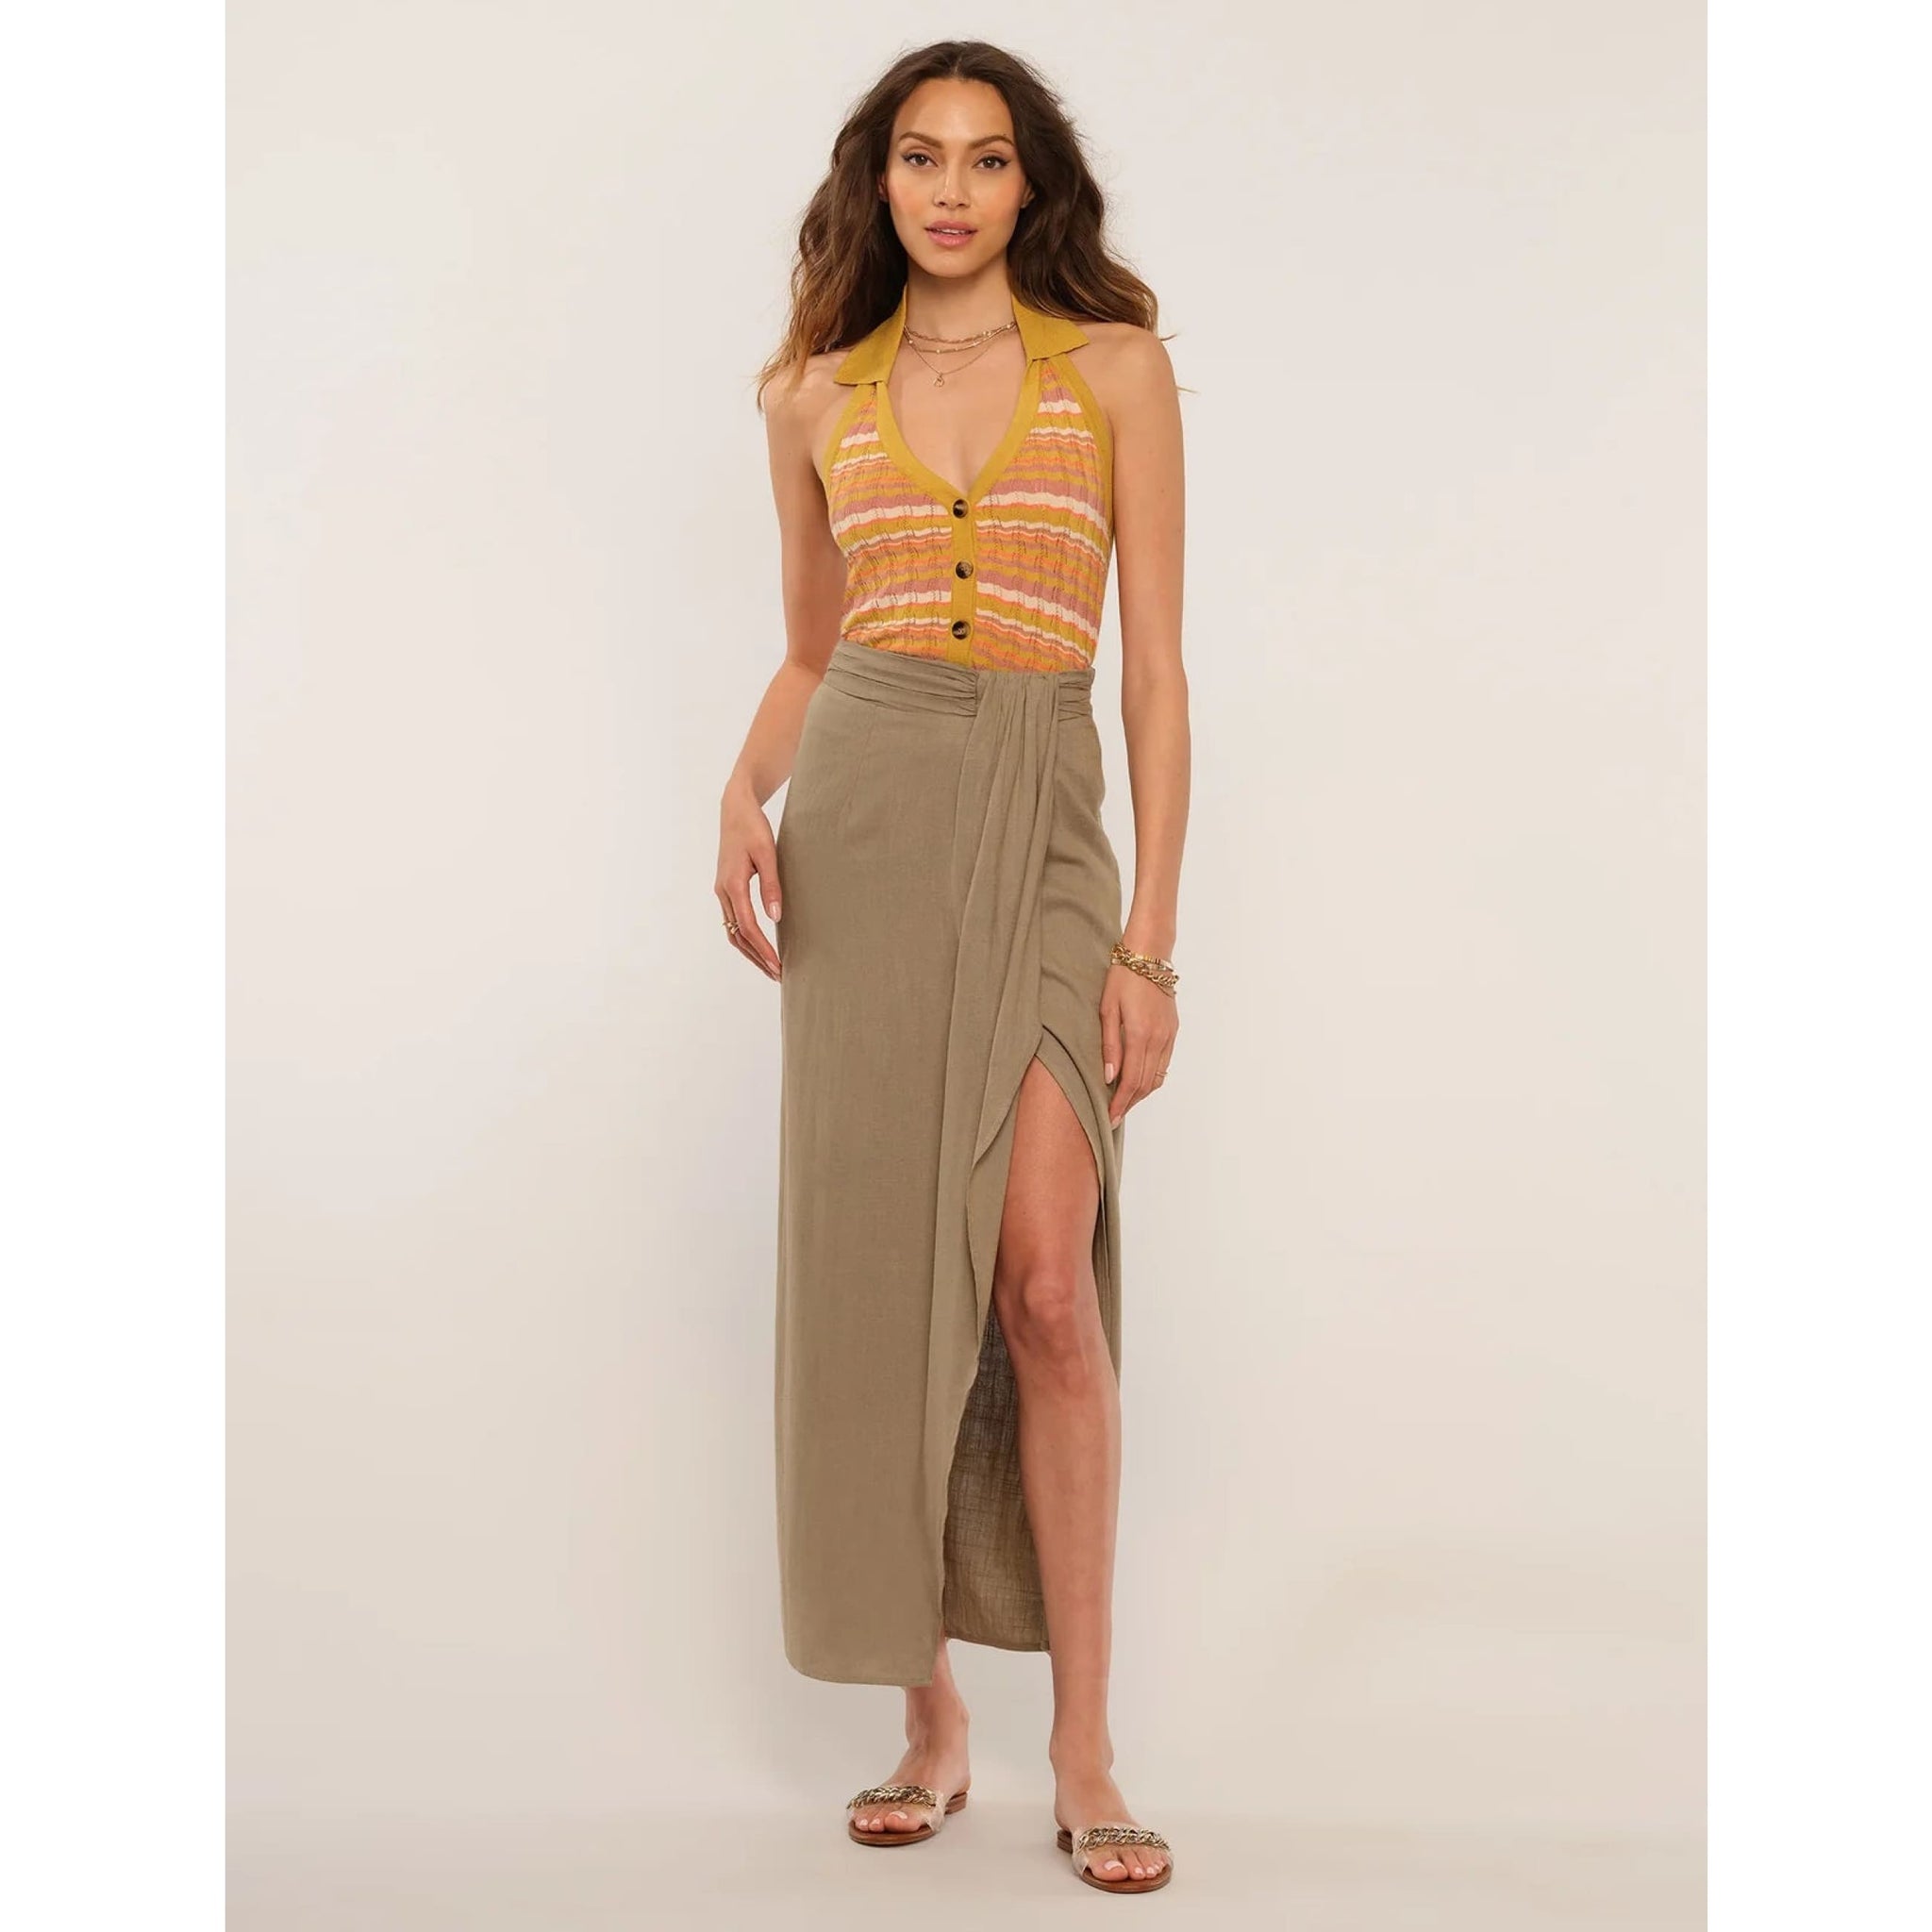 The Catriona Skirt is made of airy linen and is slim-fitting with a side slit to show some skin. It has a zipper closure and elasticized back for easy wear. Pair it with a knit cami or layer over your favorite swimwear. 